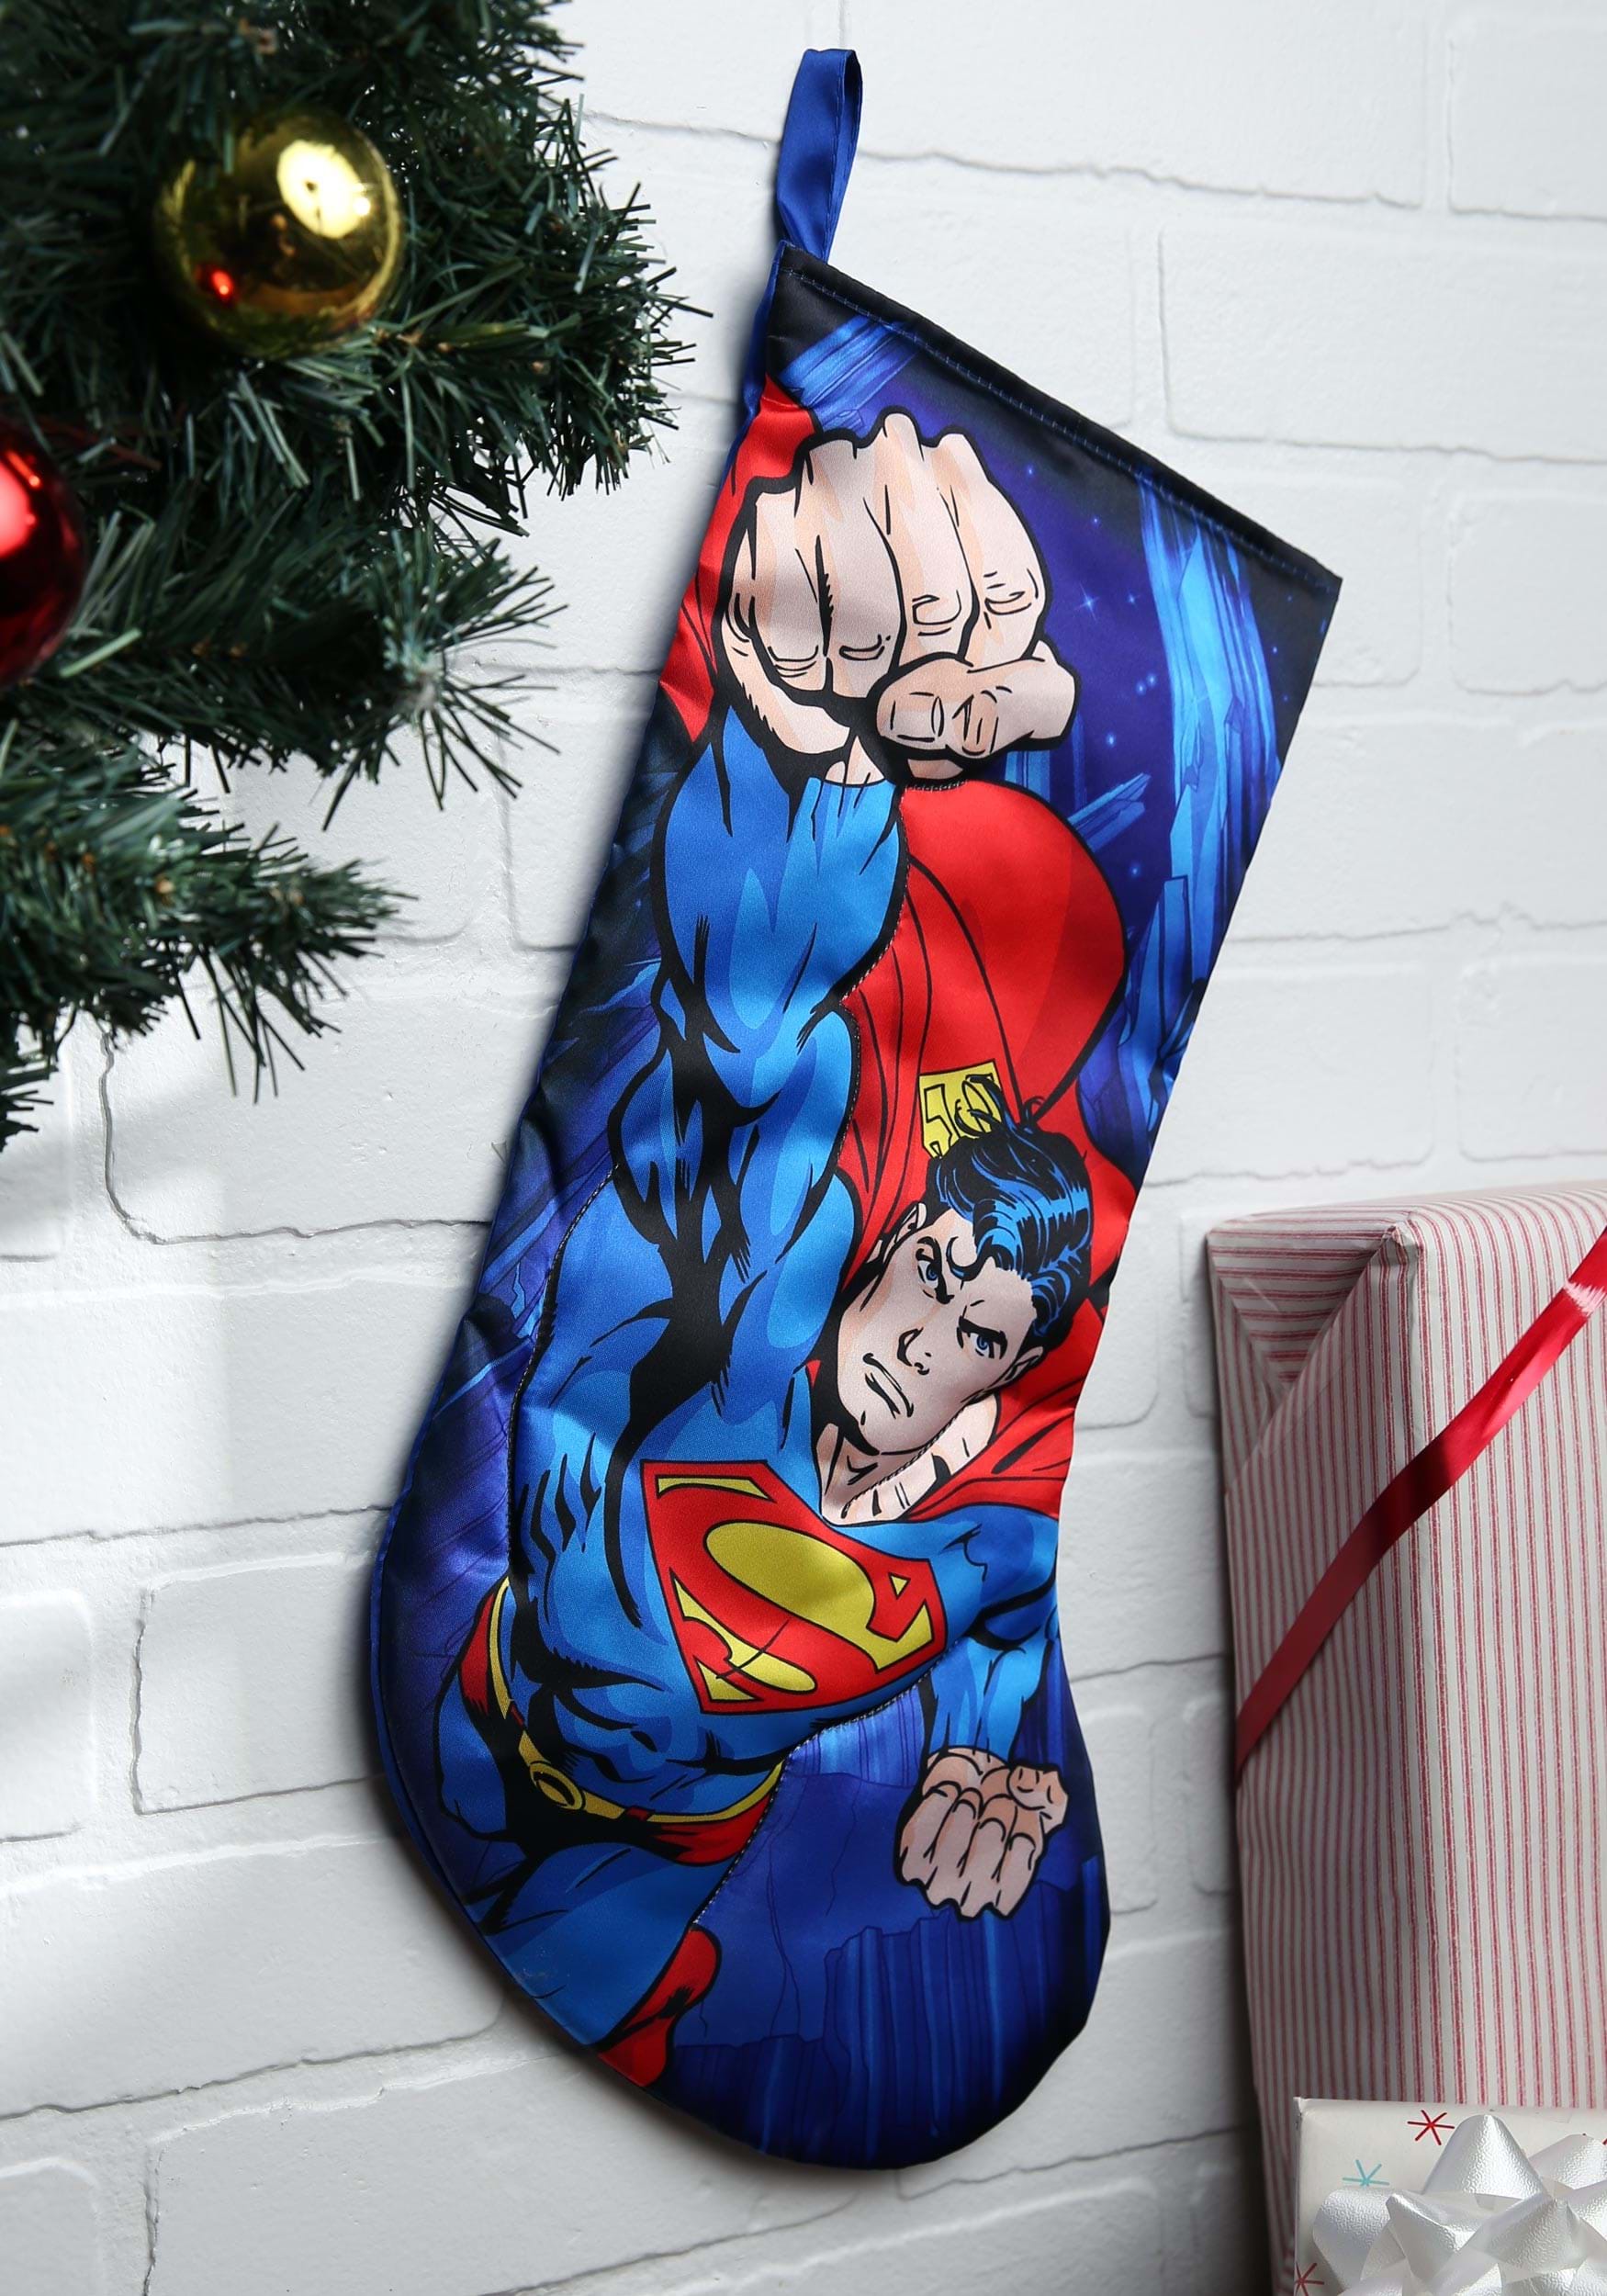 https://images.fun.com/products/67124/1-1/superman-printed-stocking-update.jpg